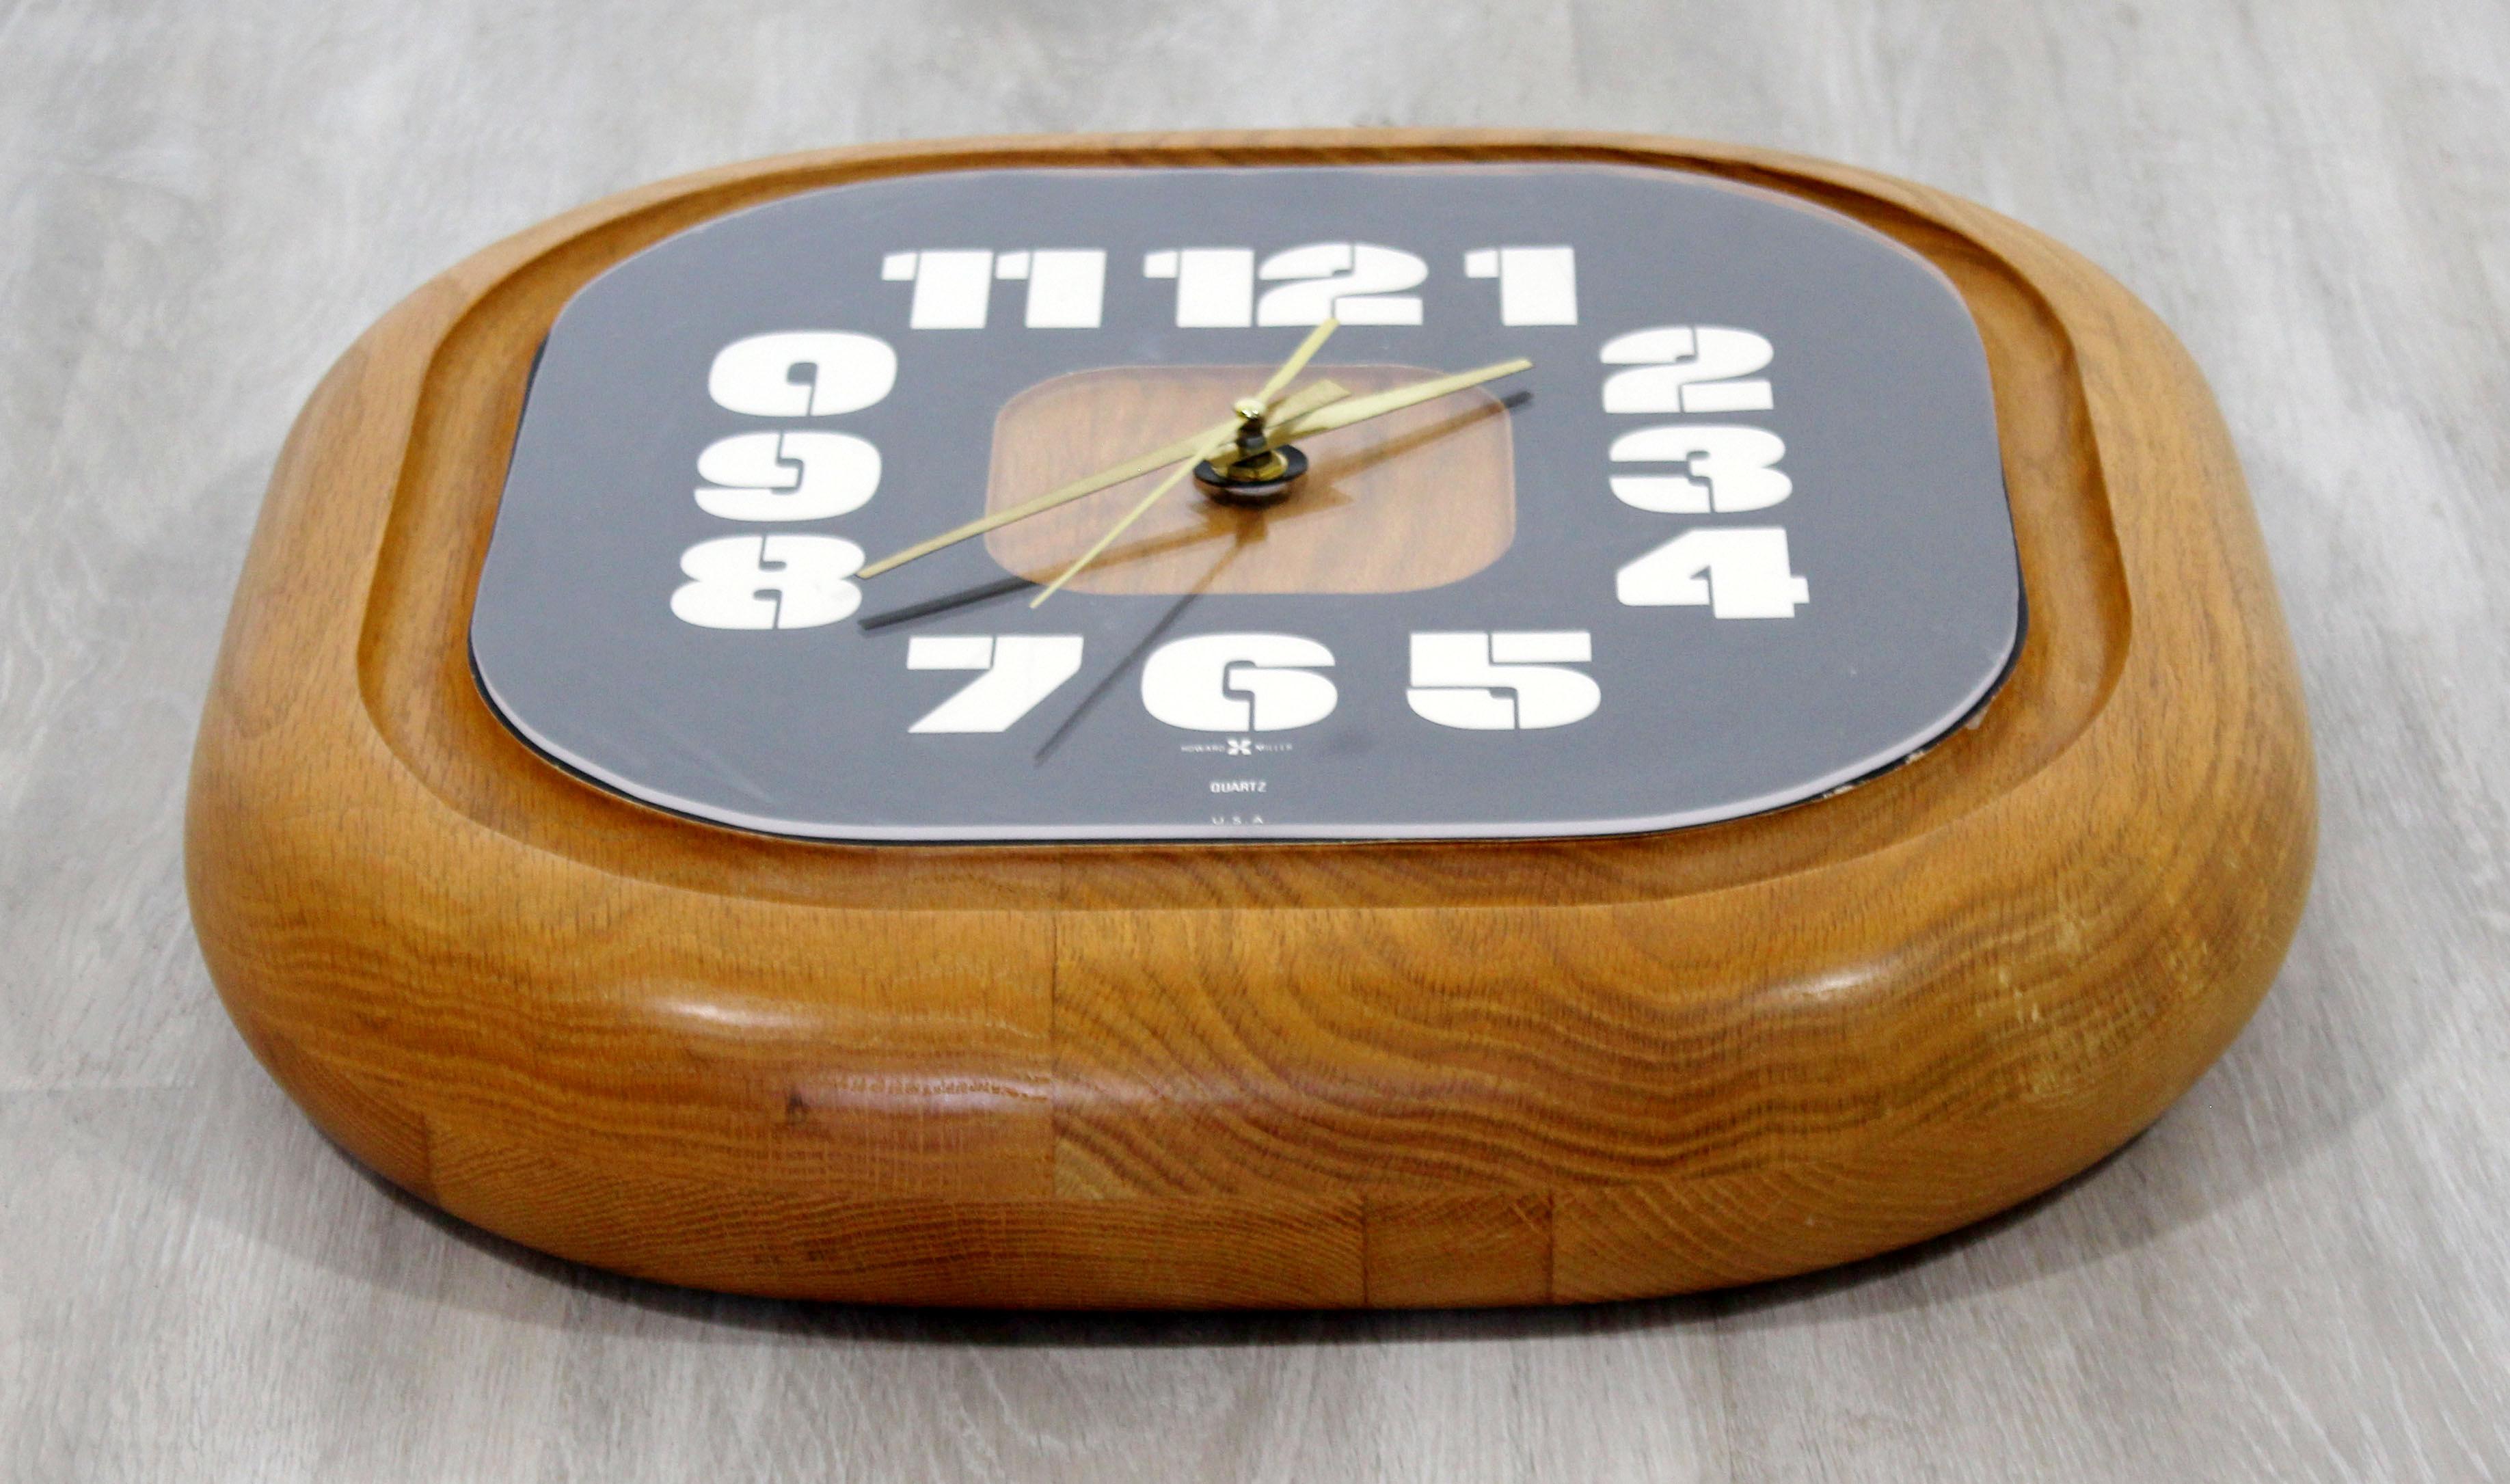 For your consideration is a phenomenal, square wall clock, made of solid wood, by George Nelson for Howard Miller, circa 1960s. In excellent vintage condition. The dimensions are 14.5